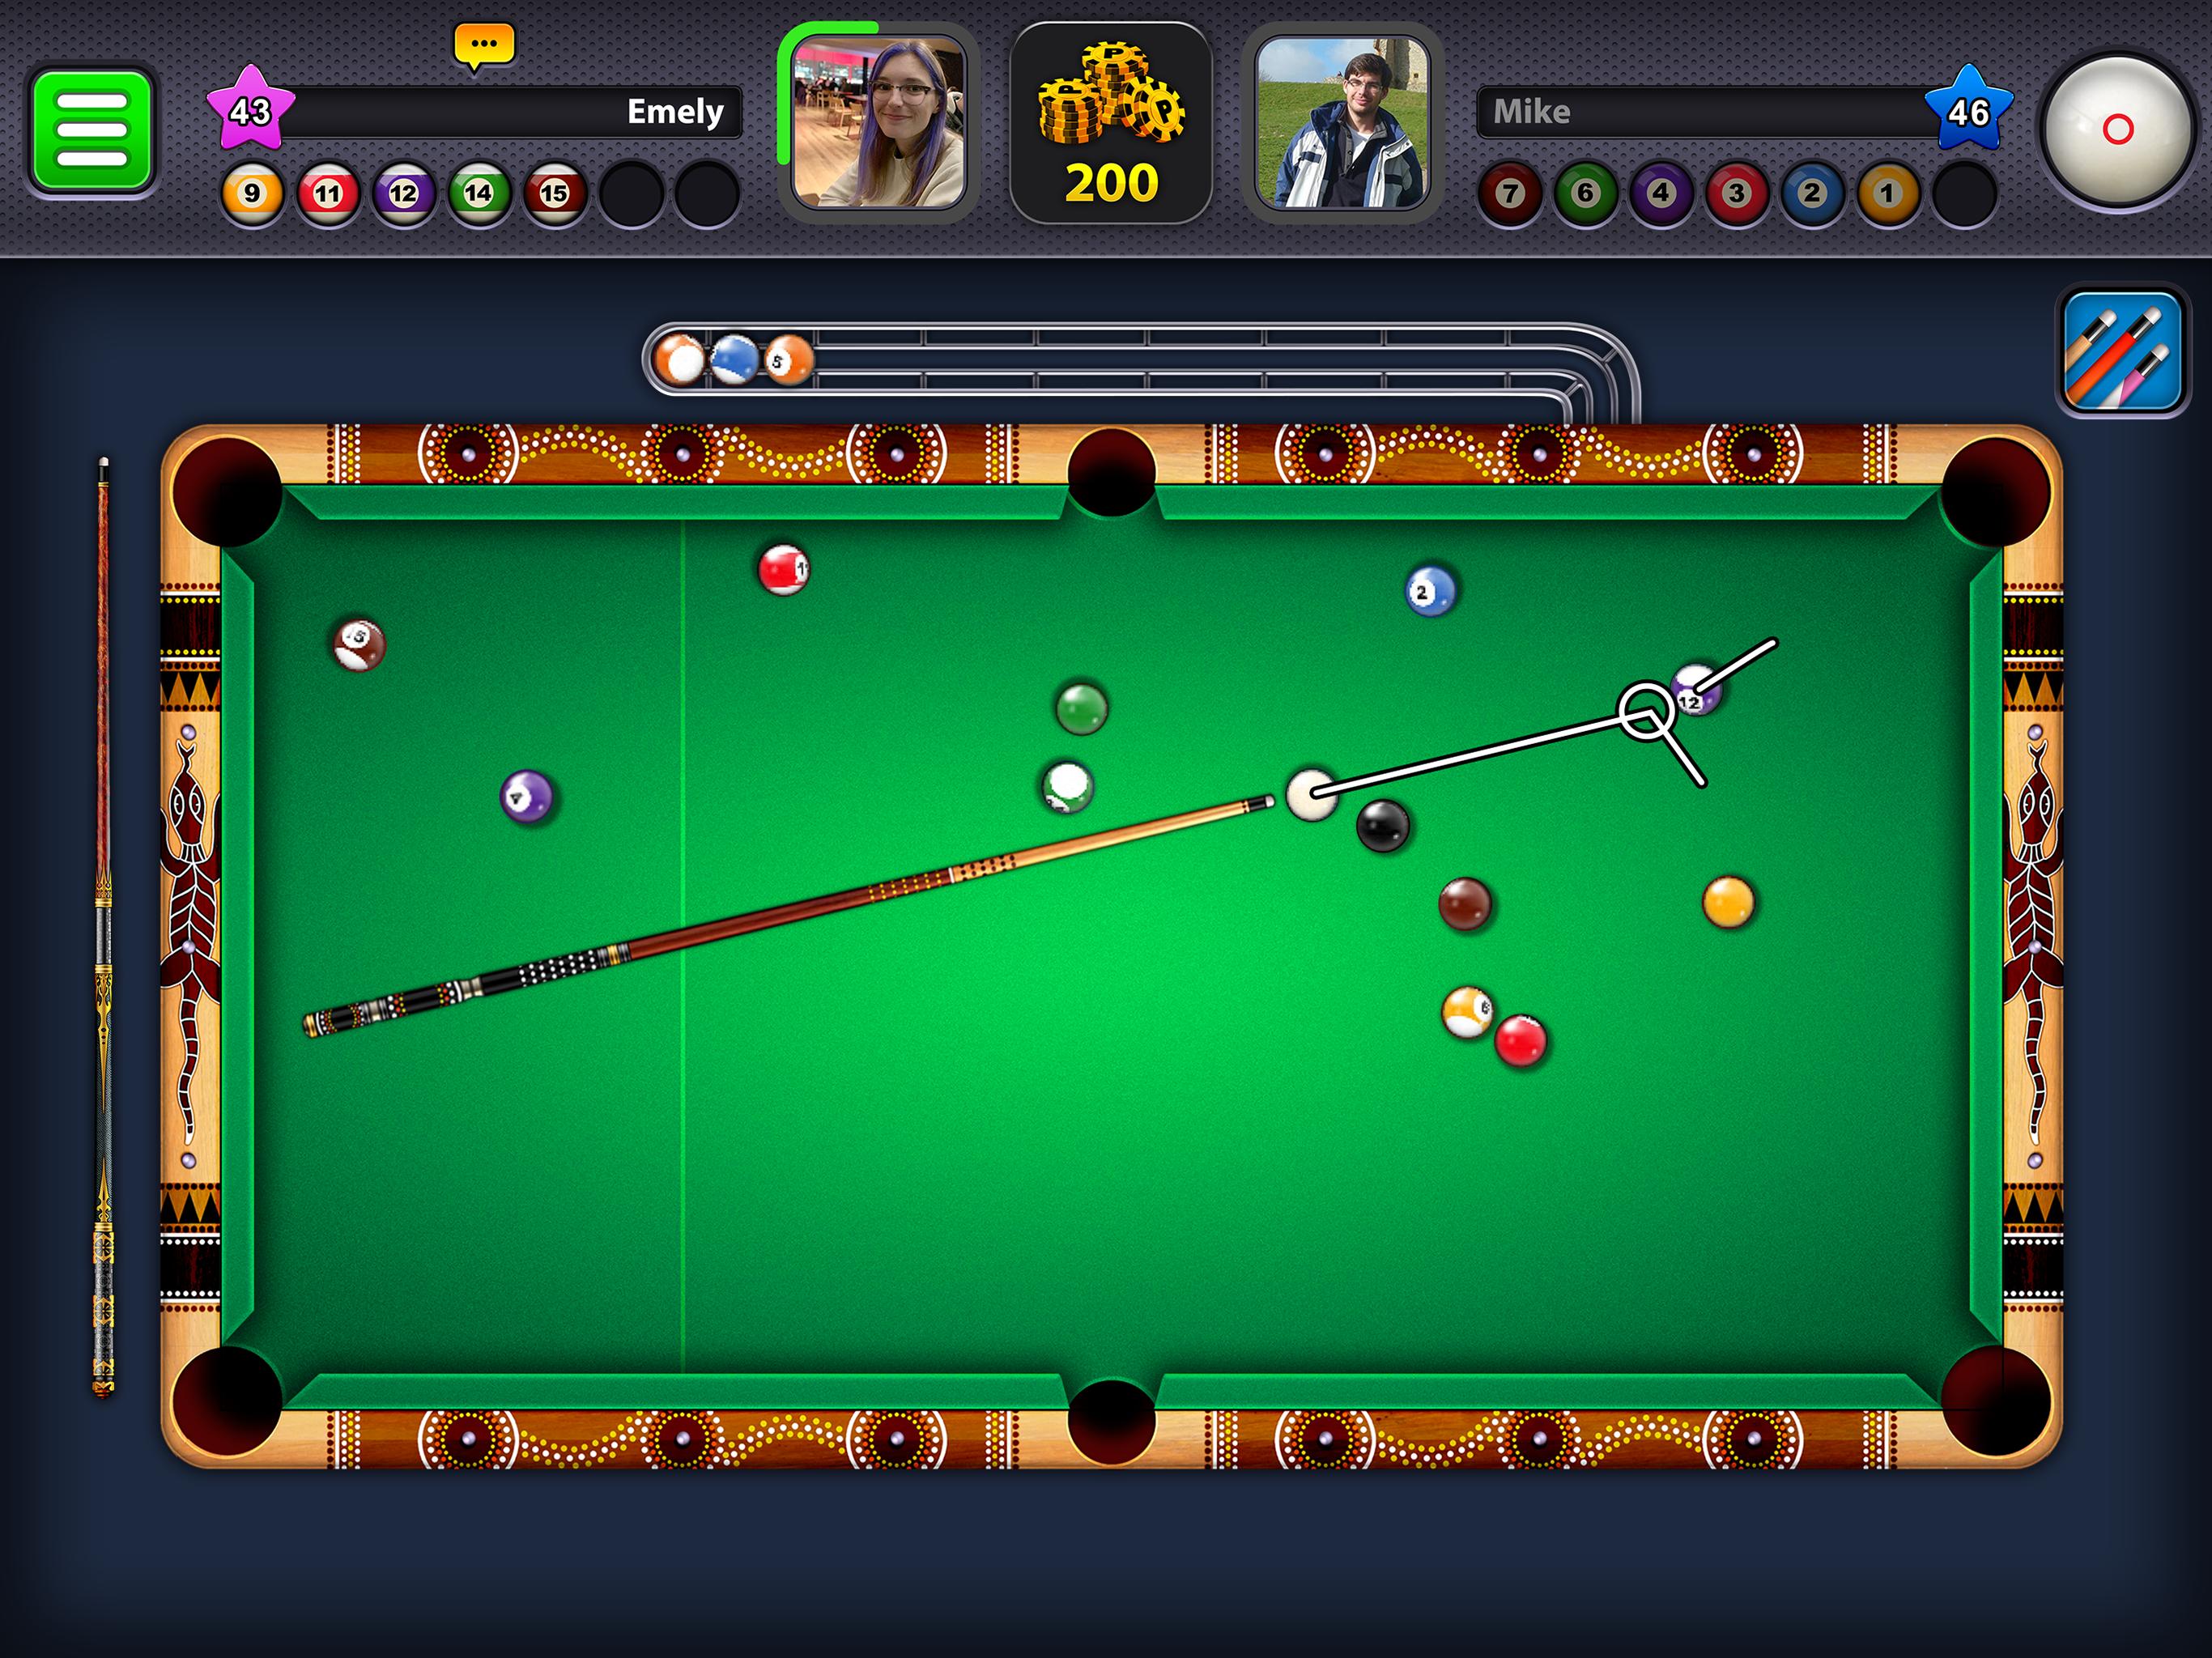 8 Ball Pool - Learn Some Strategies to Win